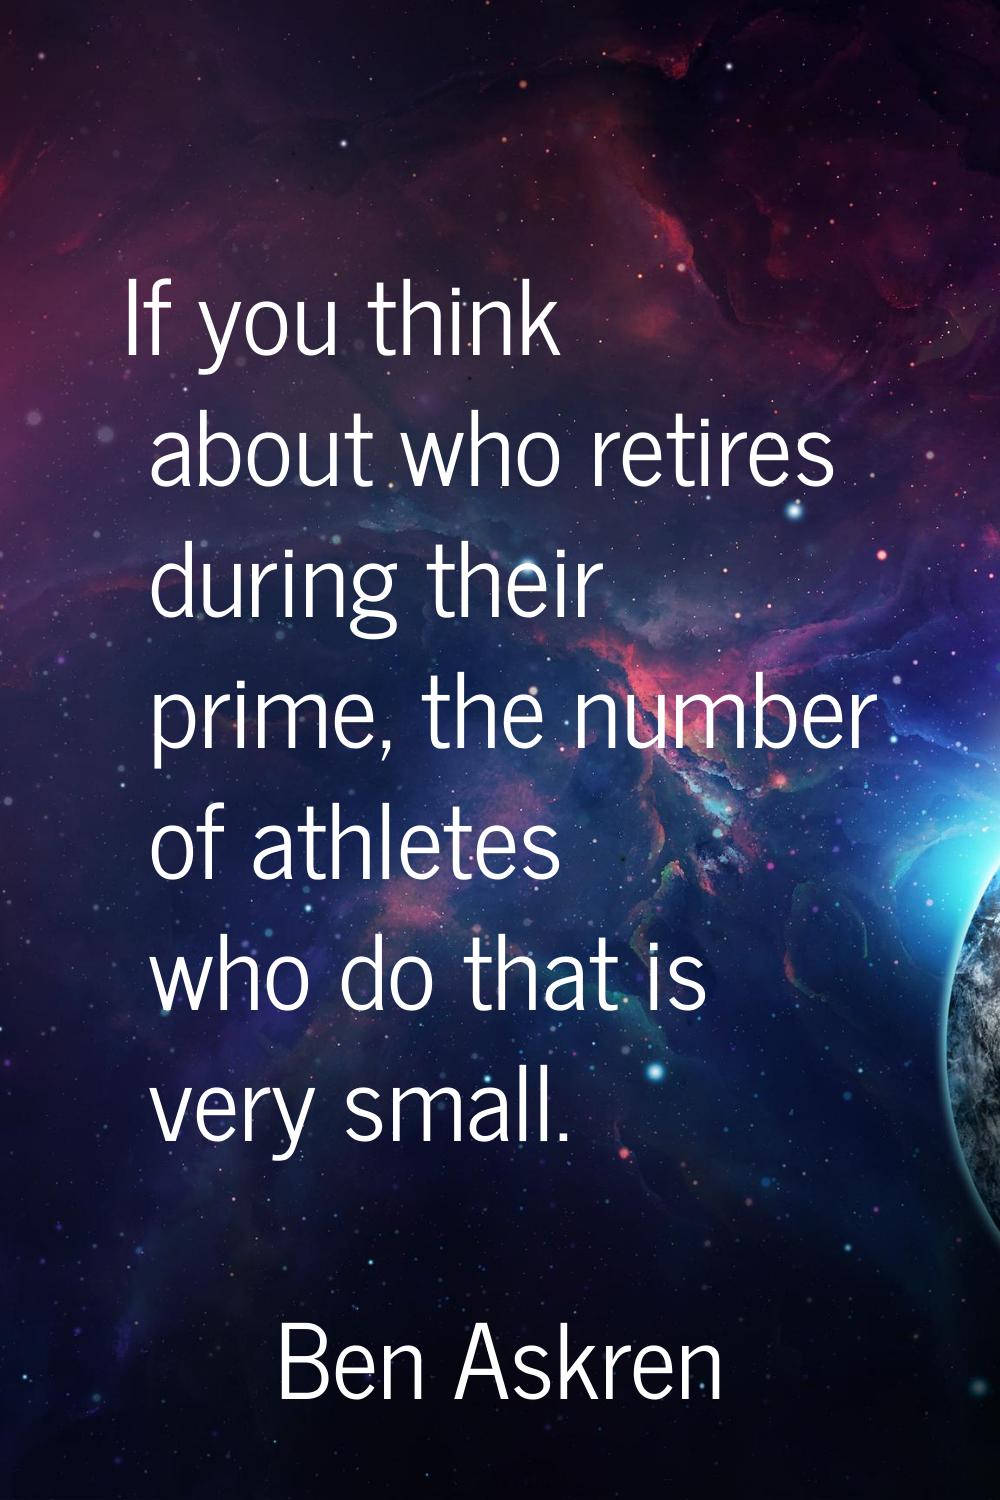 If you think about who retires during their prime, the number of athletes who do that is very small